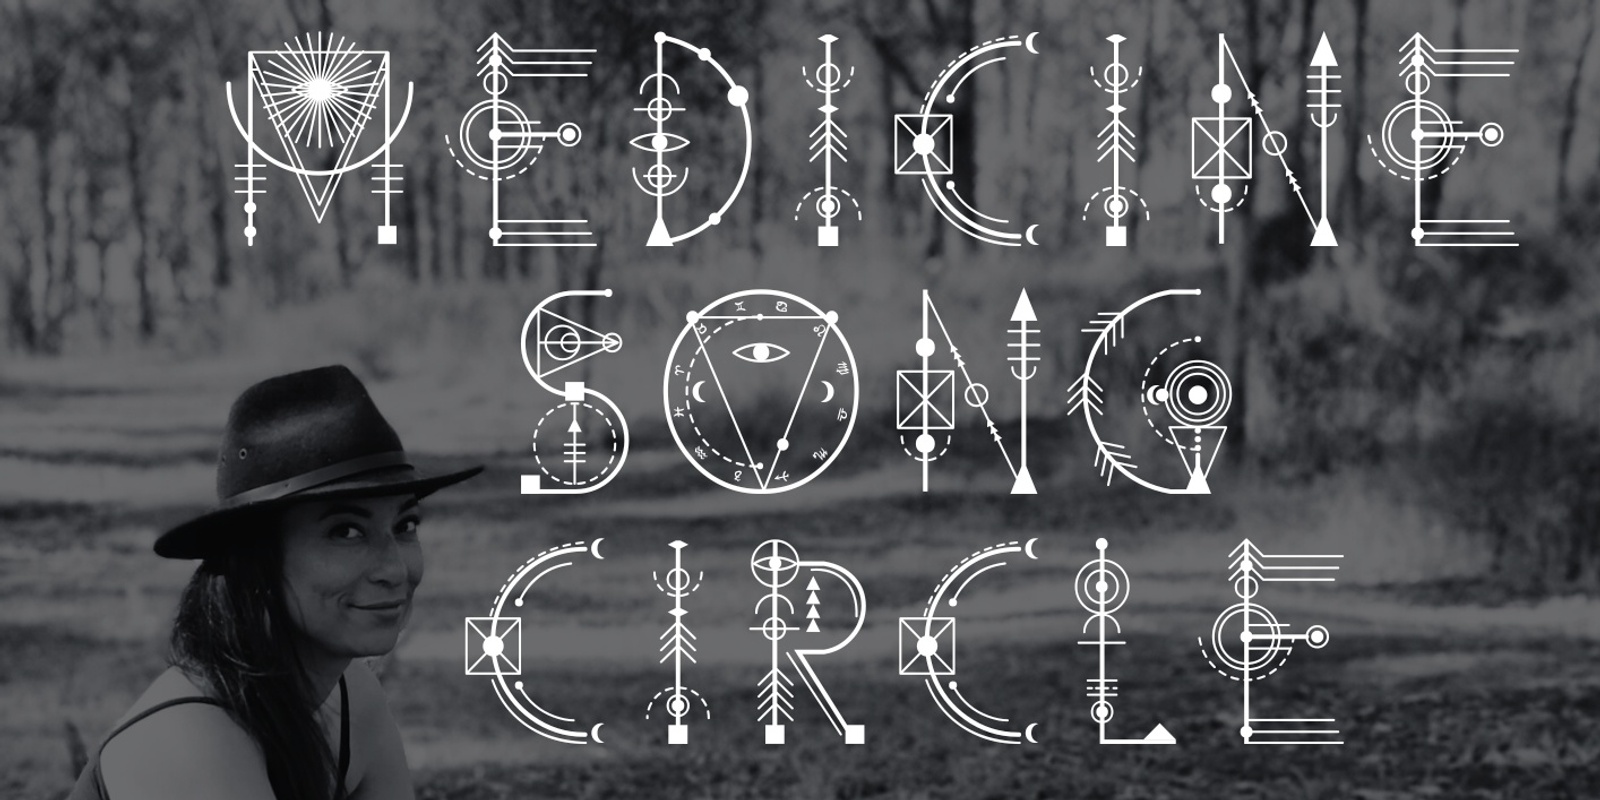 Banner image for Medicine Song Circle 